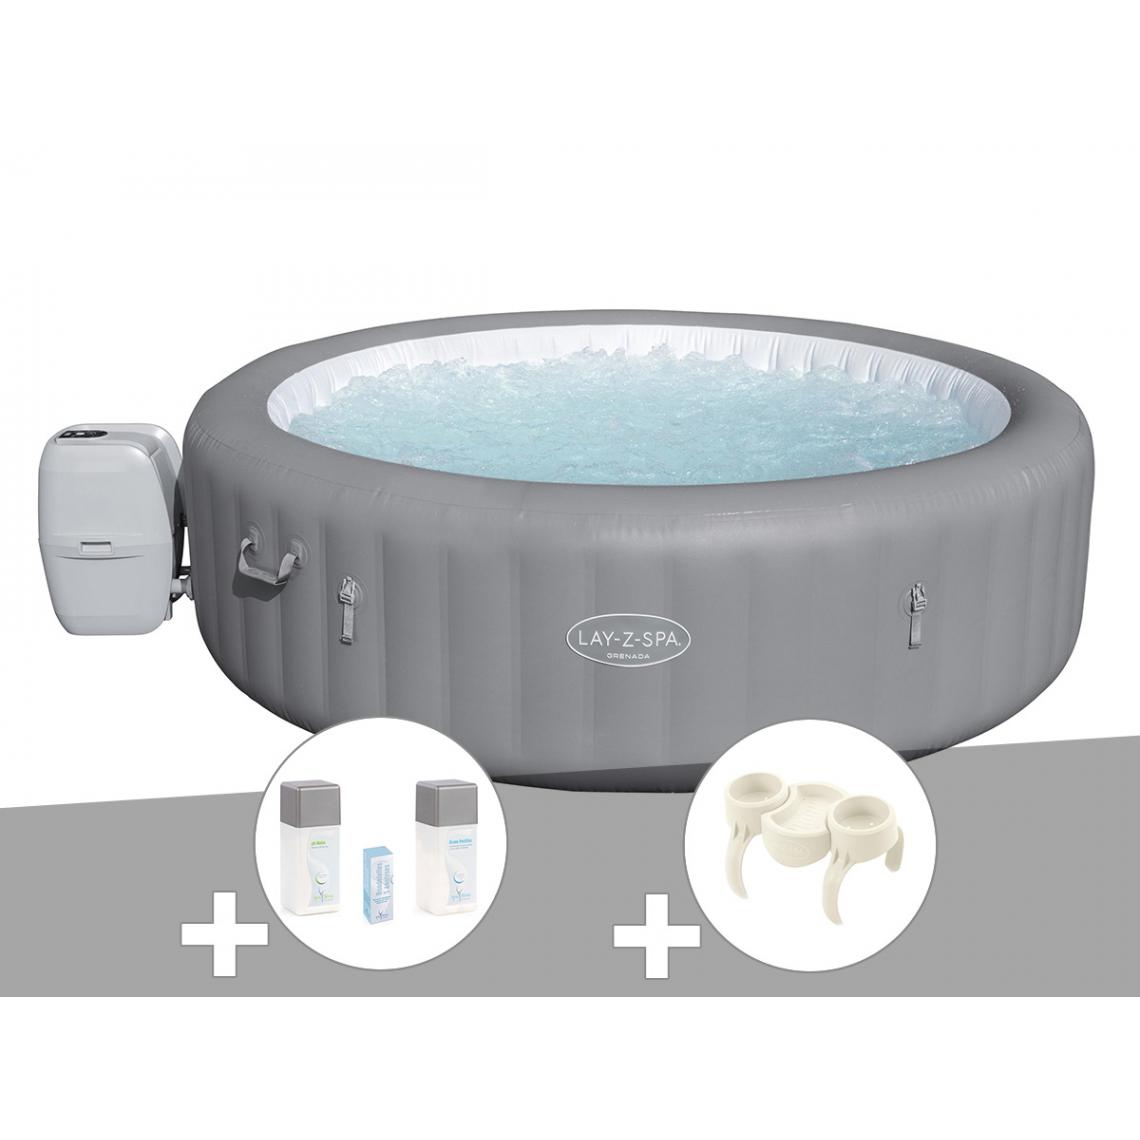 Bestway - Kit spa gonflable Bestway Lay-Z-Spa Grenada rond Airjet 6/8 places + Kit traitement brome + Porte-gobelets - Spa gonflable